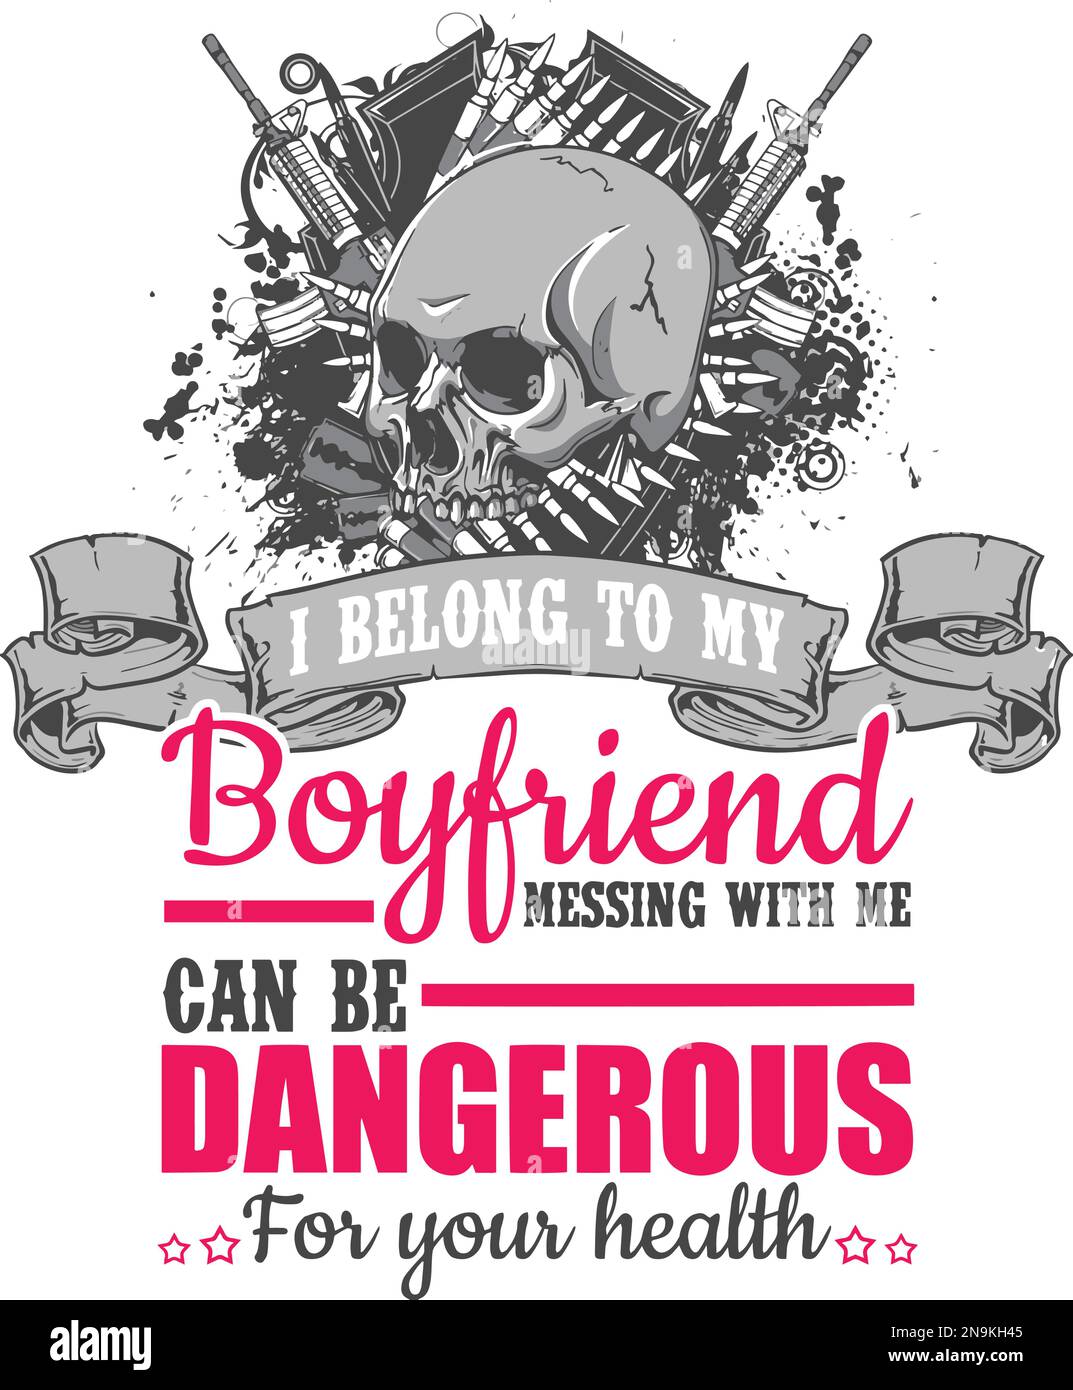 I belong to my boyfriend messing with me can be dangerous for your health. Girl t-shirt design. Stock Vector